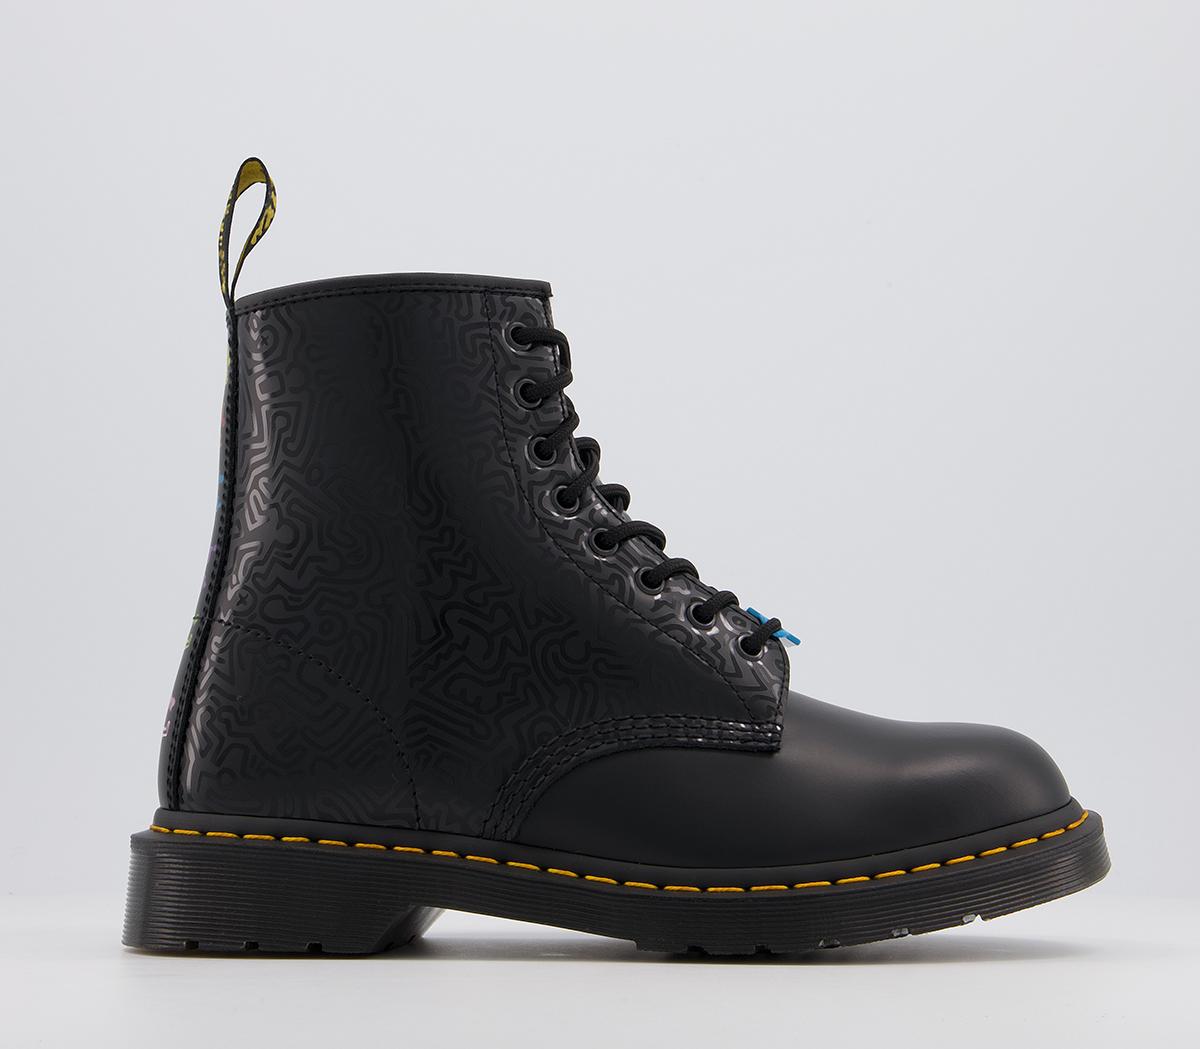 Dr. MartensKeith Haring 8 Eye Boots MBlack